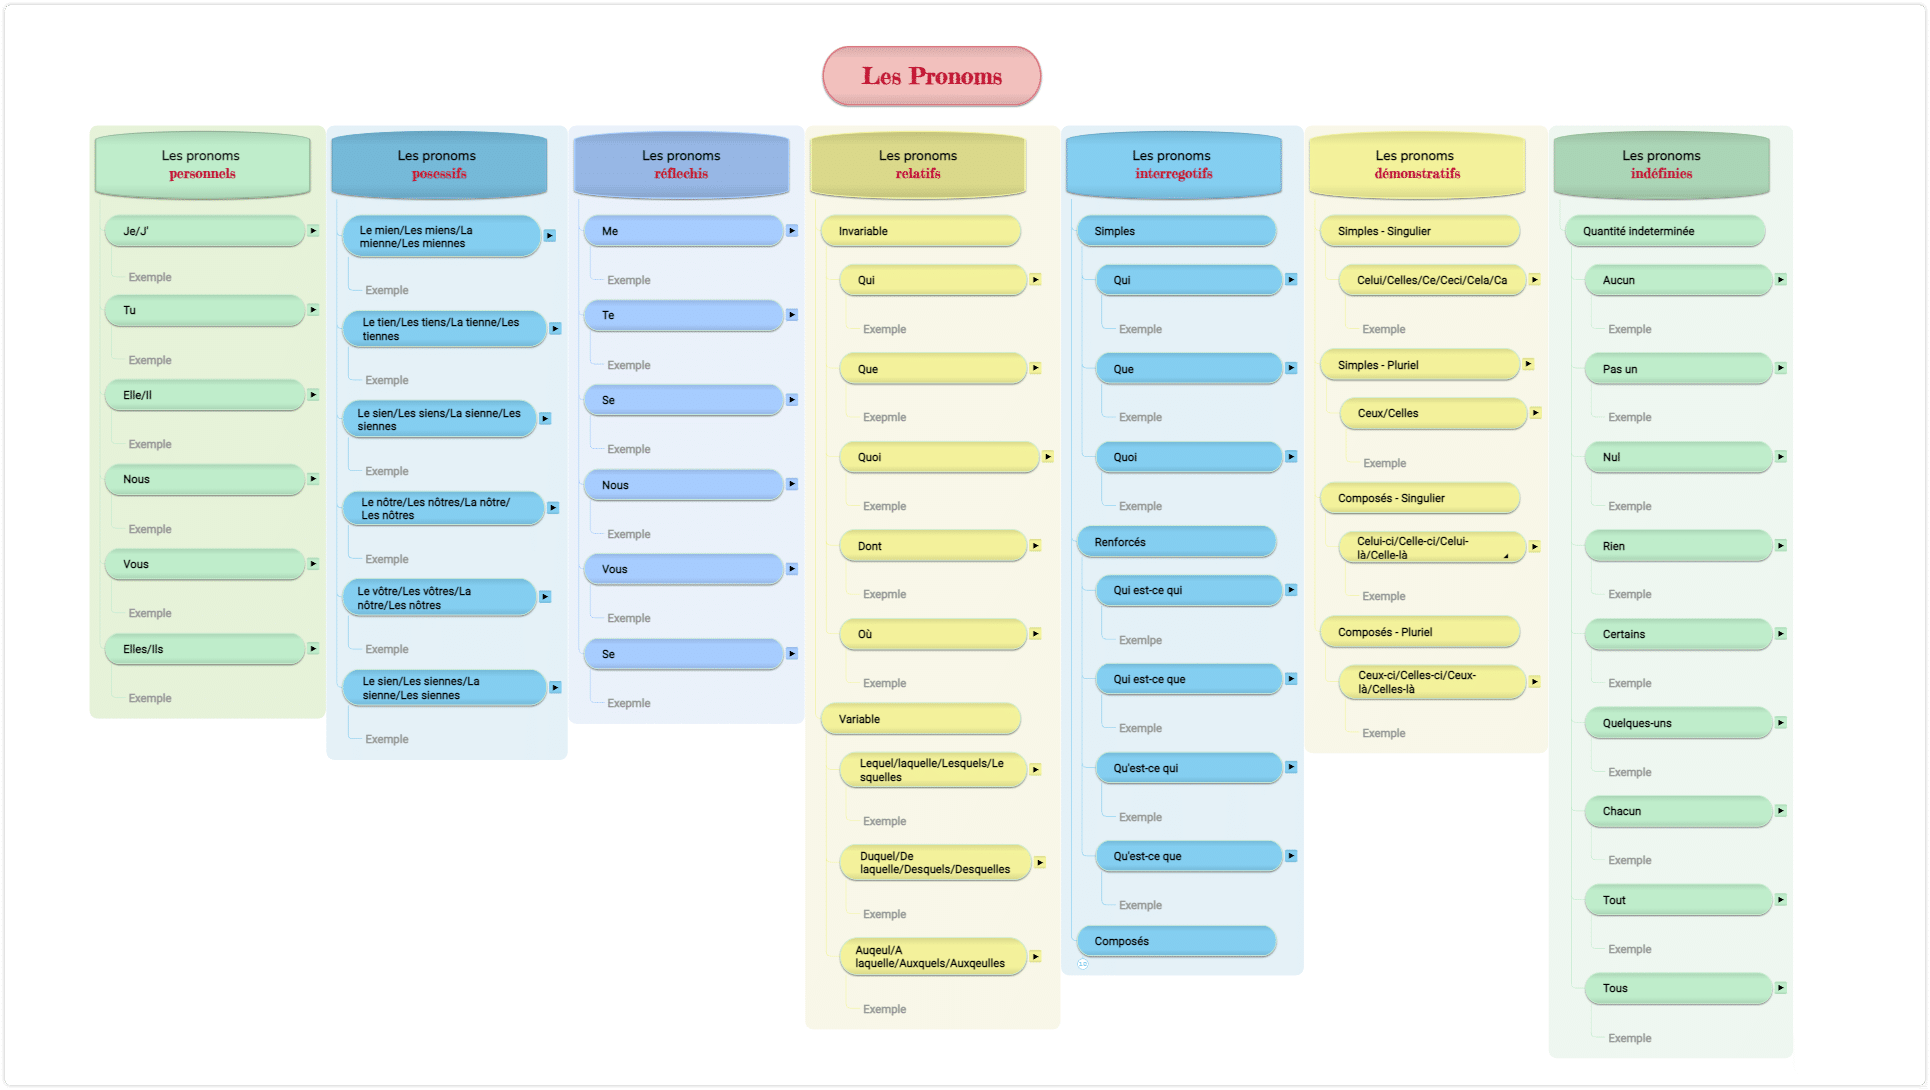 mind map example to study pronunciation in a foreig language